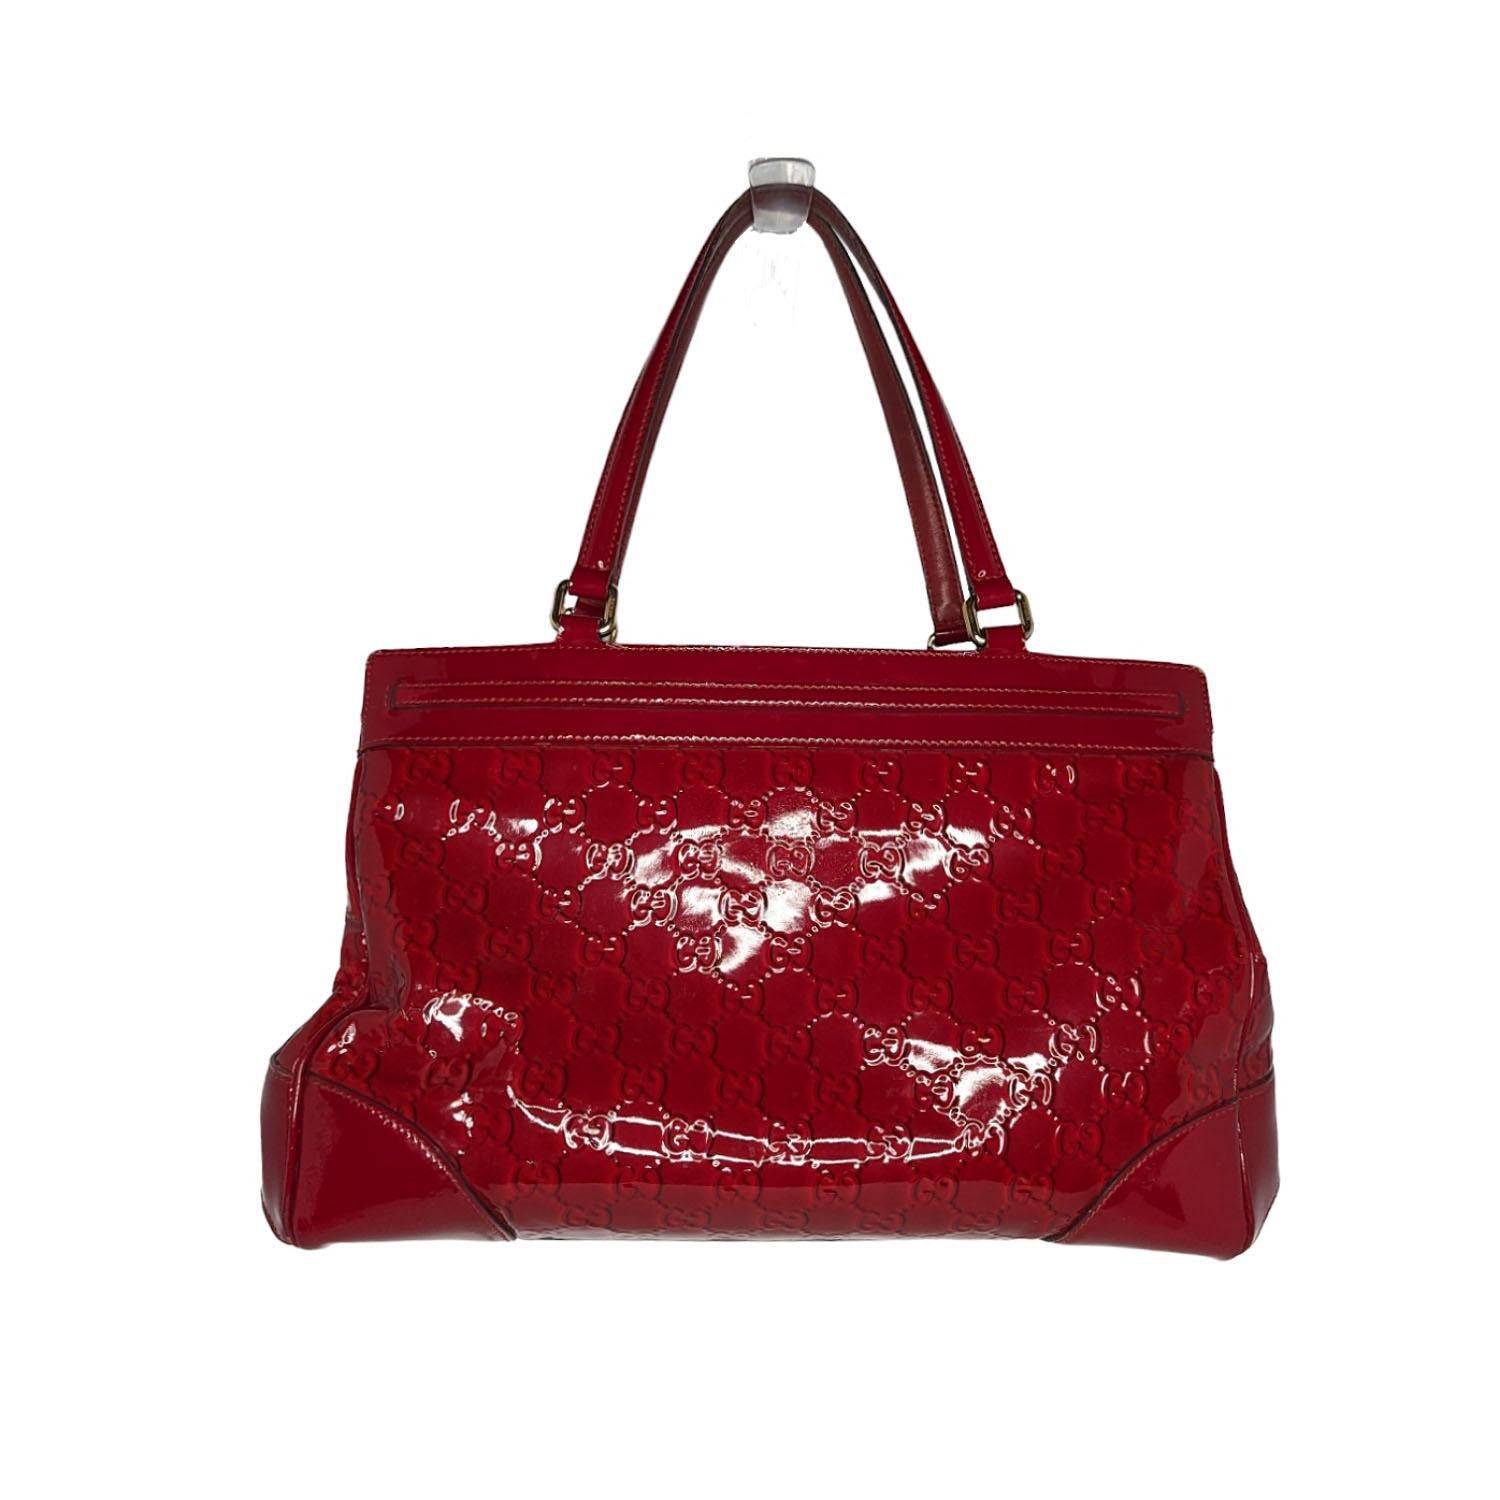 This sophisticated tote is crafted of glossy Guccissima Gucci GG monogram embossed patent leather in bright red. The bag features leather strap top handles with brass links and leather top trim with a leather bow embellishment. The top zipper opens